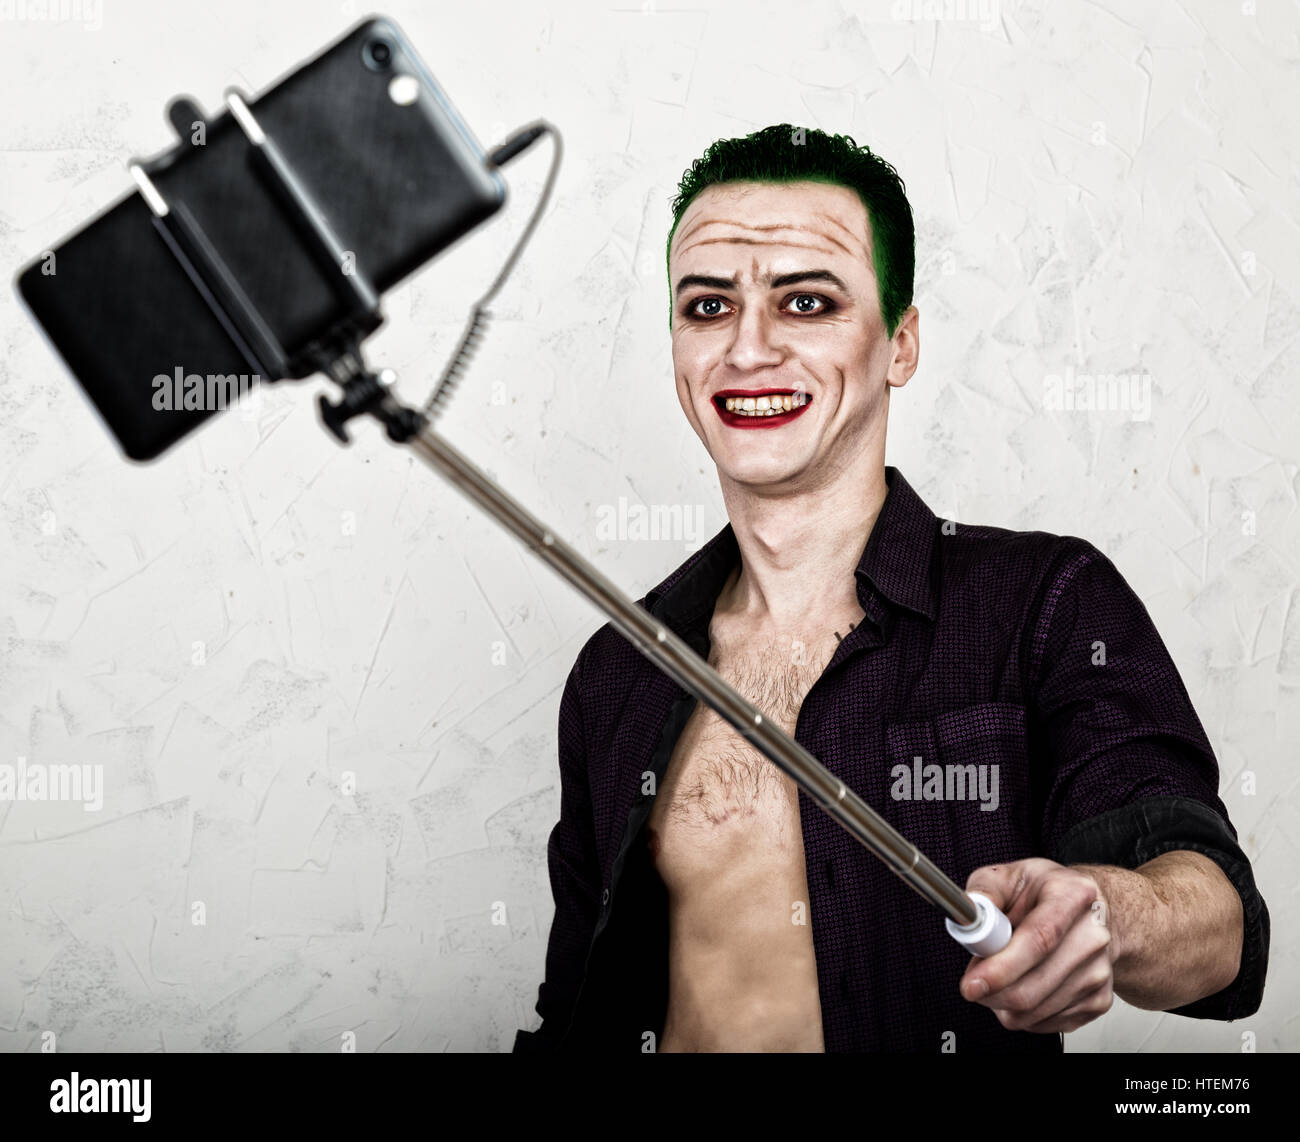 guy with crazy joker face, green hair and idiotic smile. carnaval ...